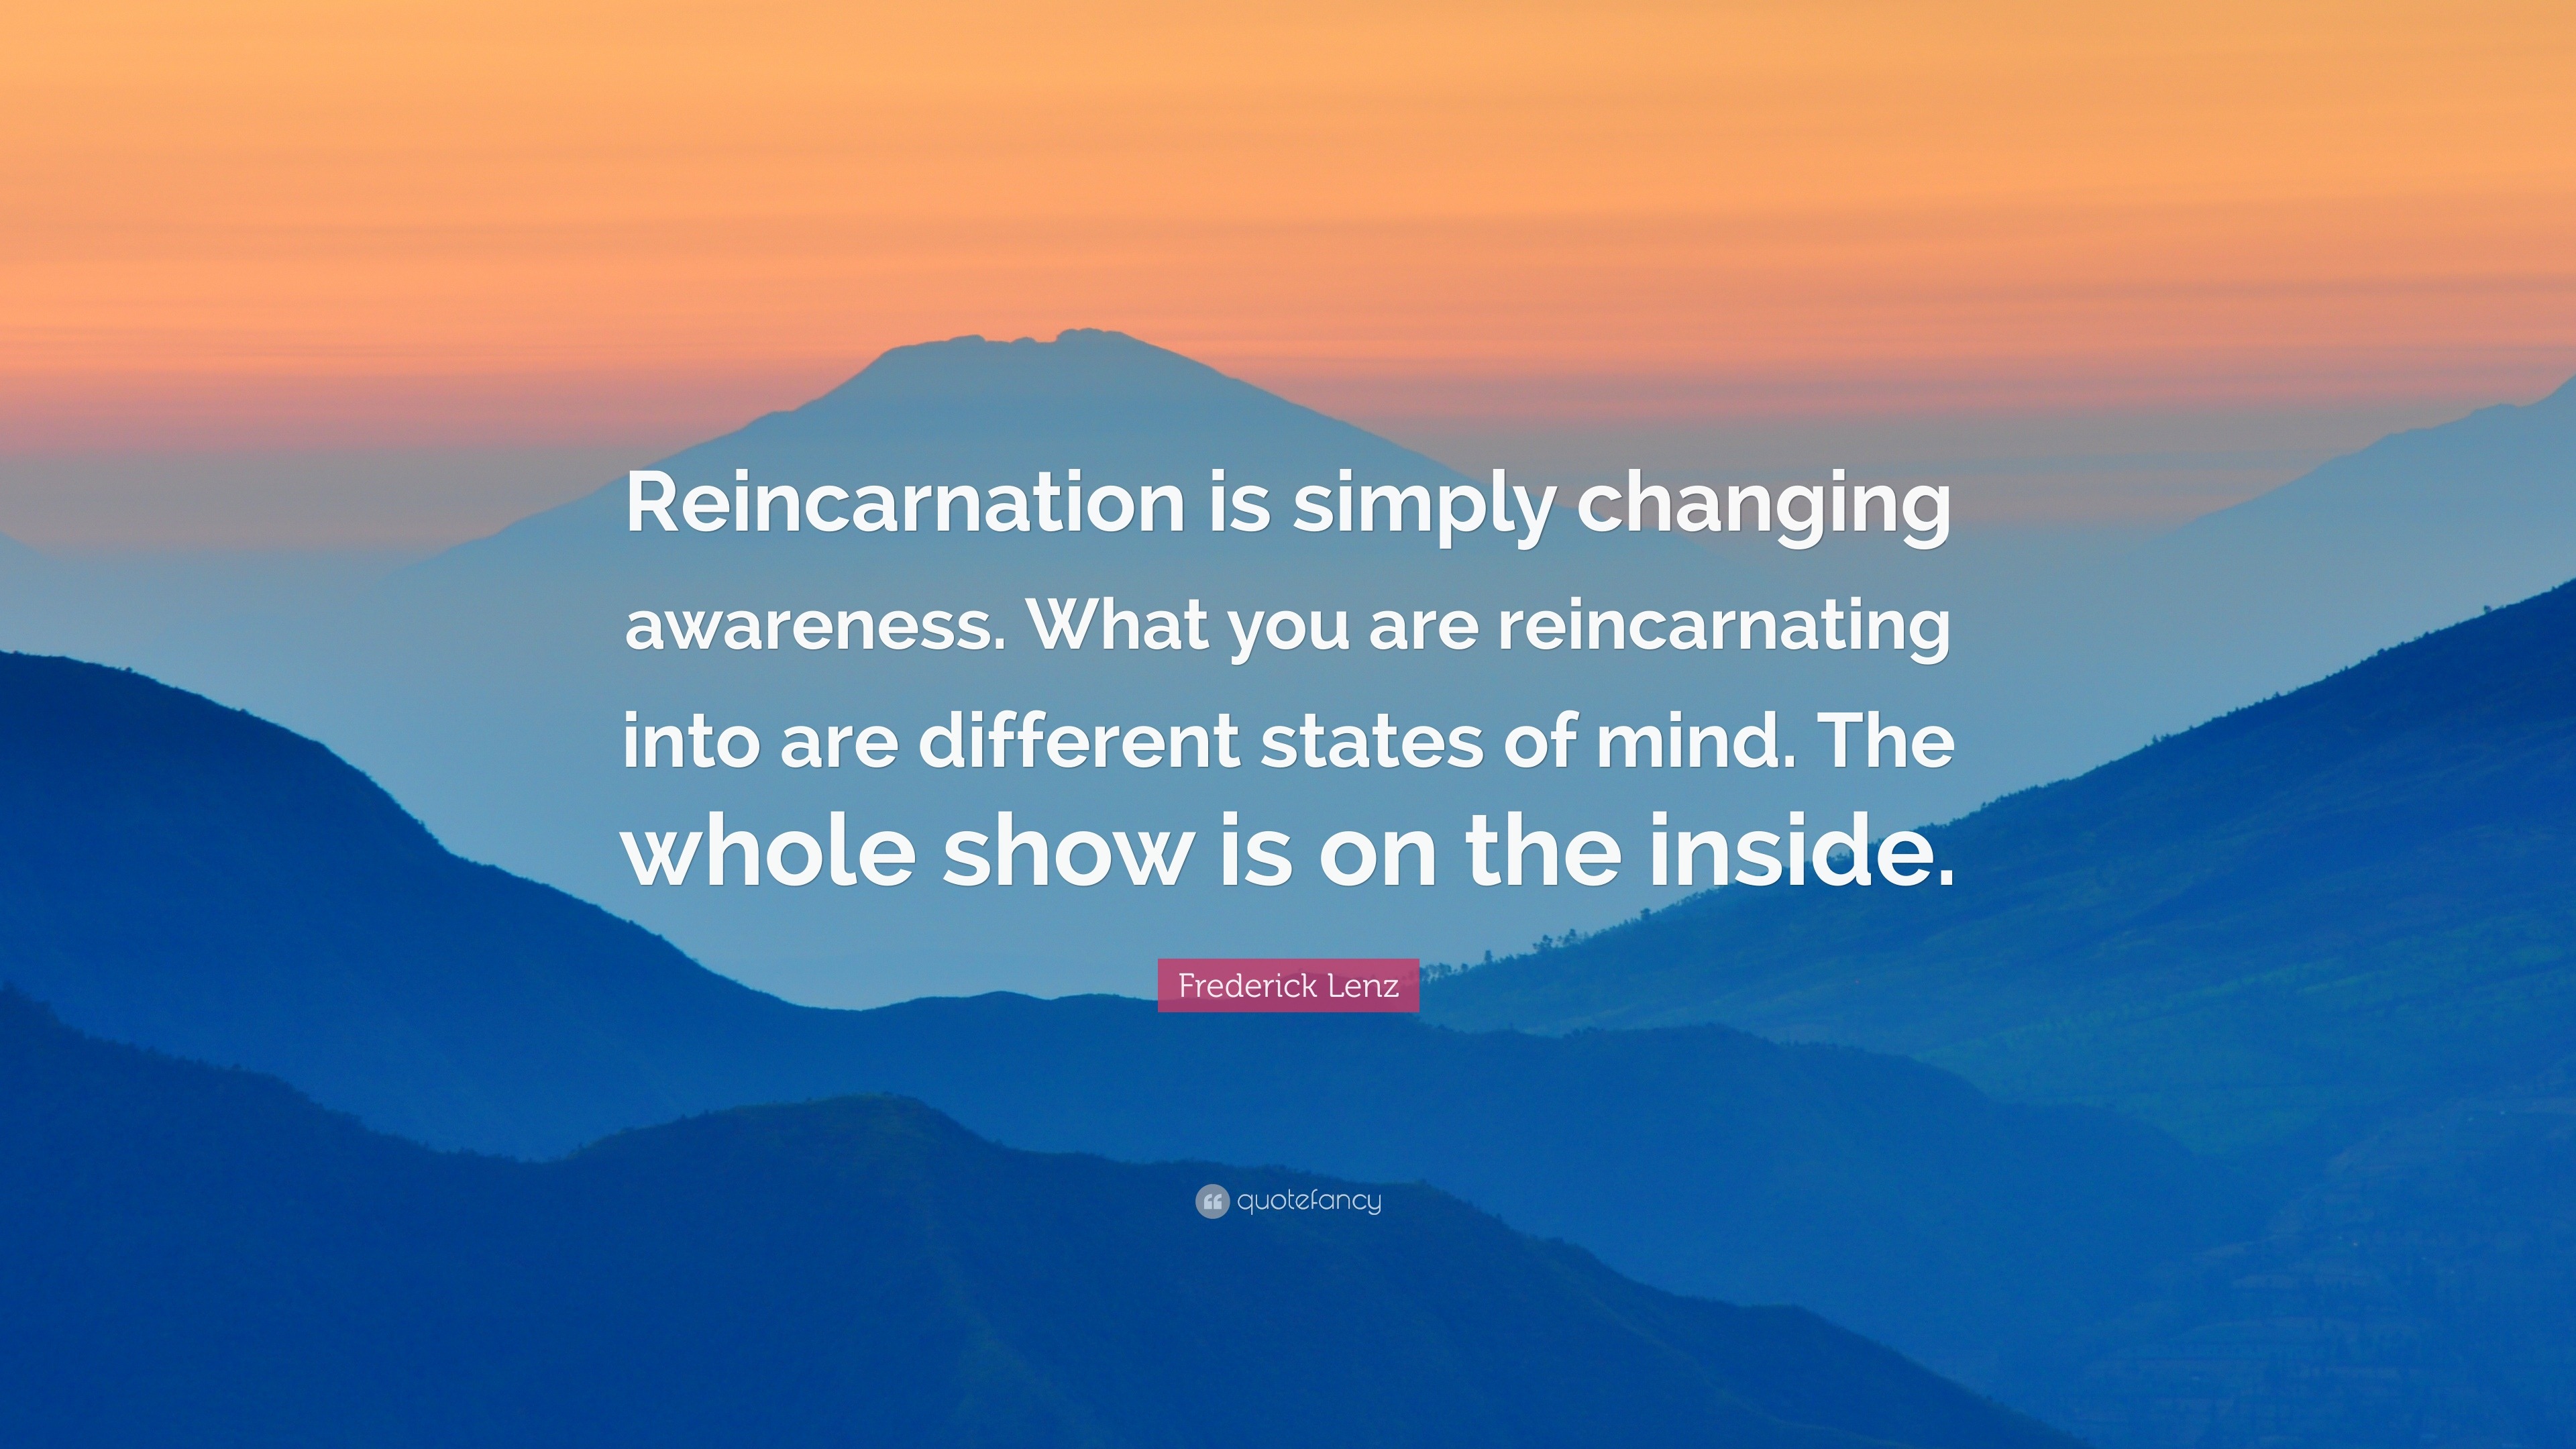 Frederick Lenz Quote: “Reincarnation is simply changing awareness. What ...